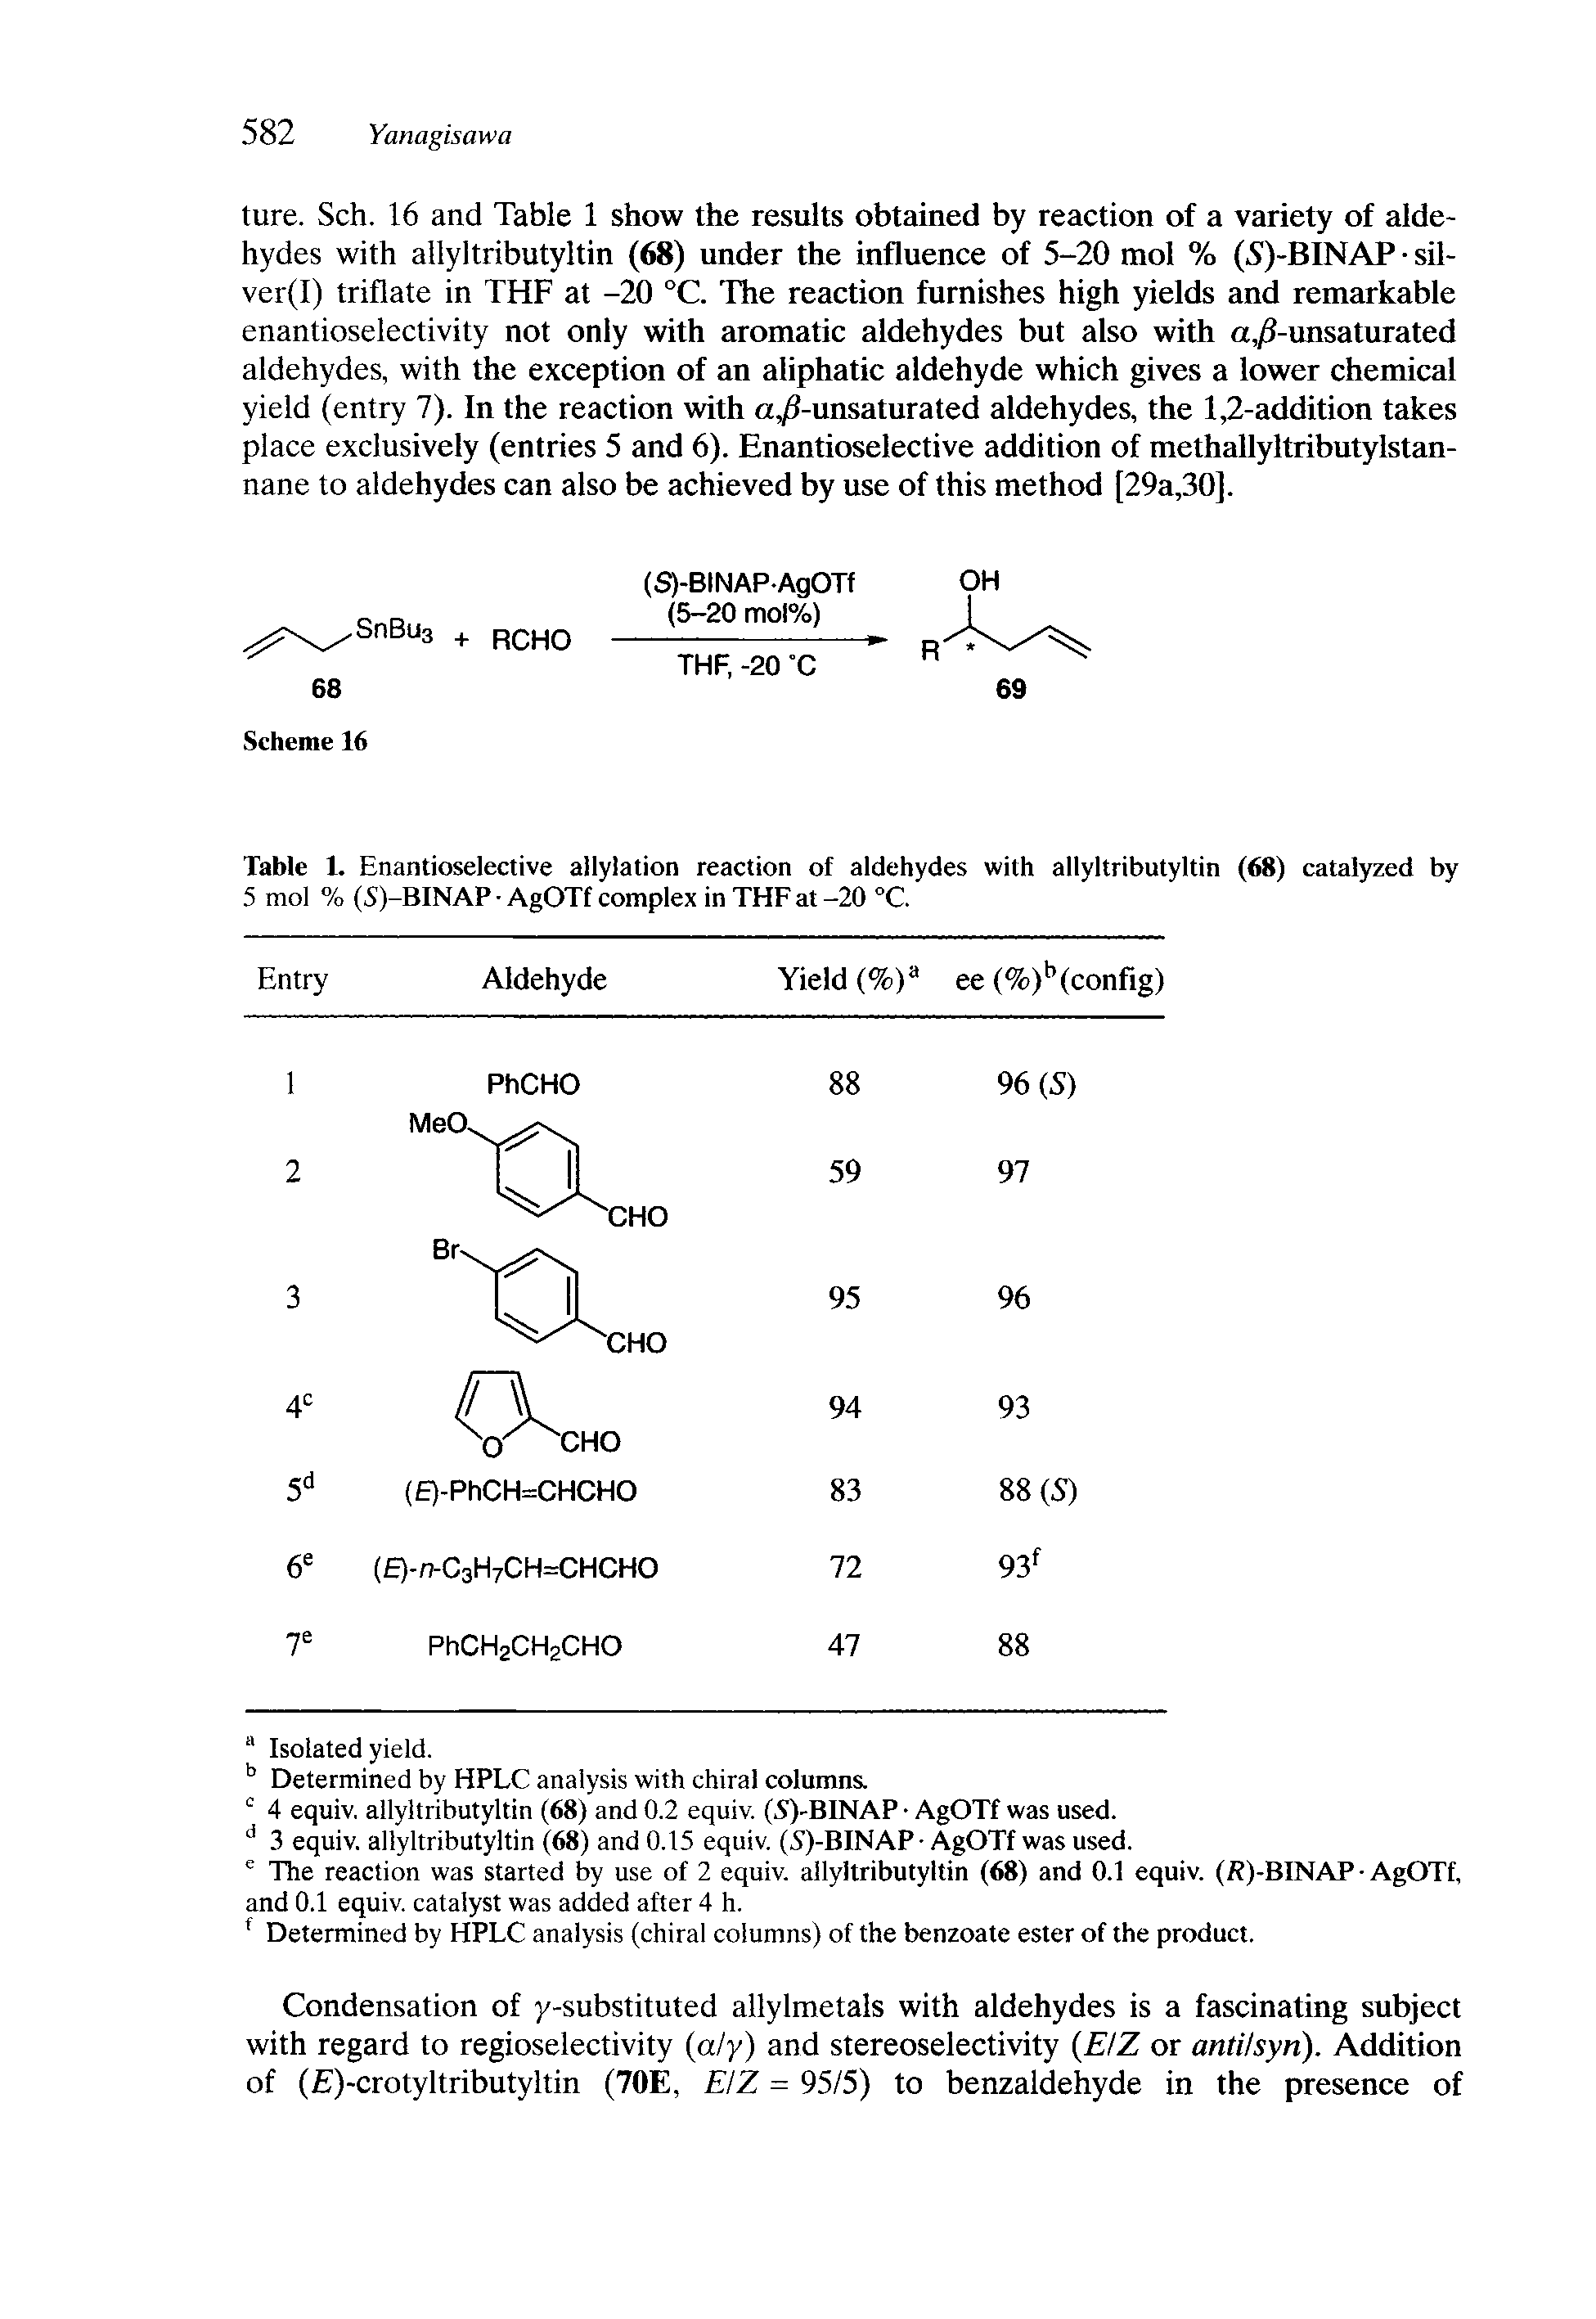 Table 1. Enantioselective allylation reaction of aldehydes with allyltributyltin (68) catalyzed by 5 mol % (S)-BINAP-AgOTtcomplex in THF at-20 °C.